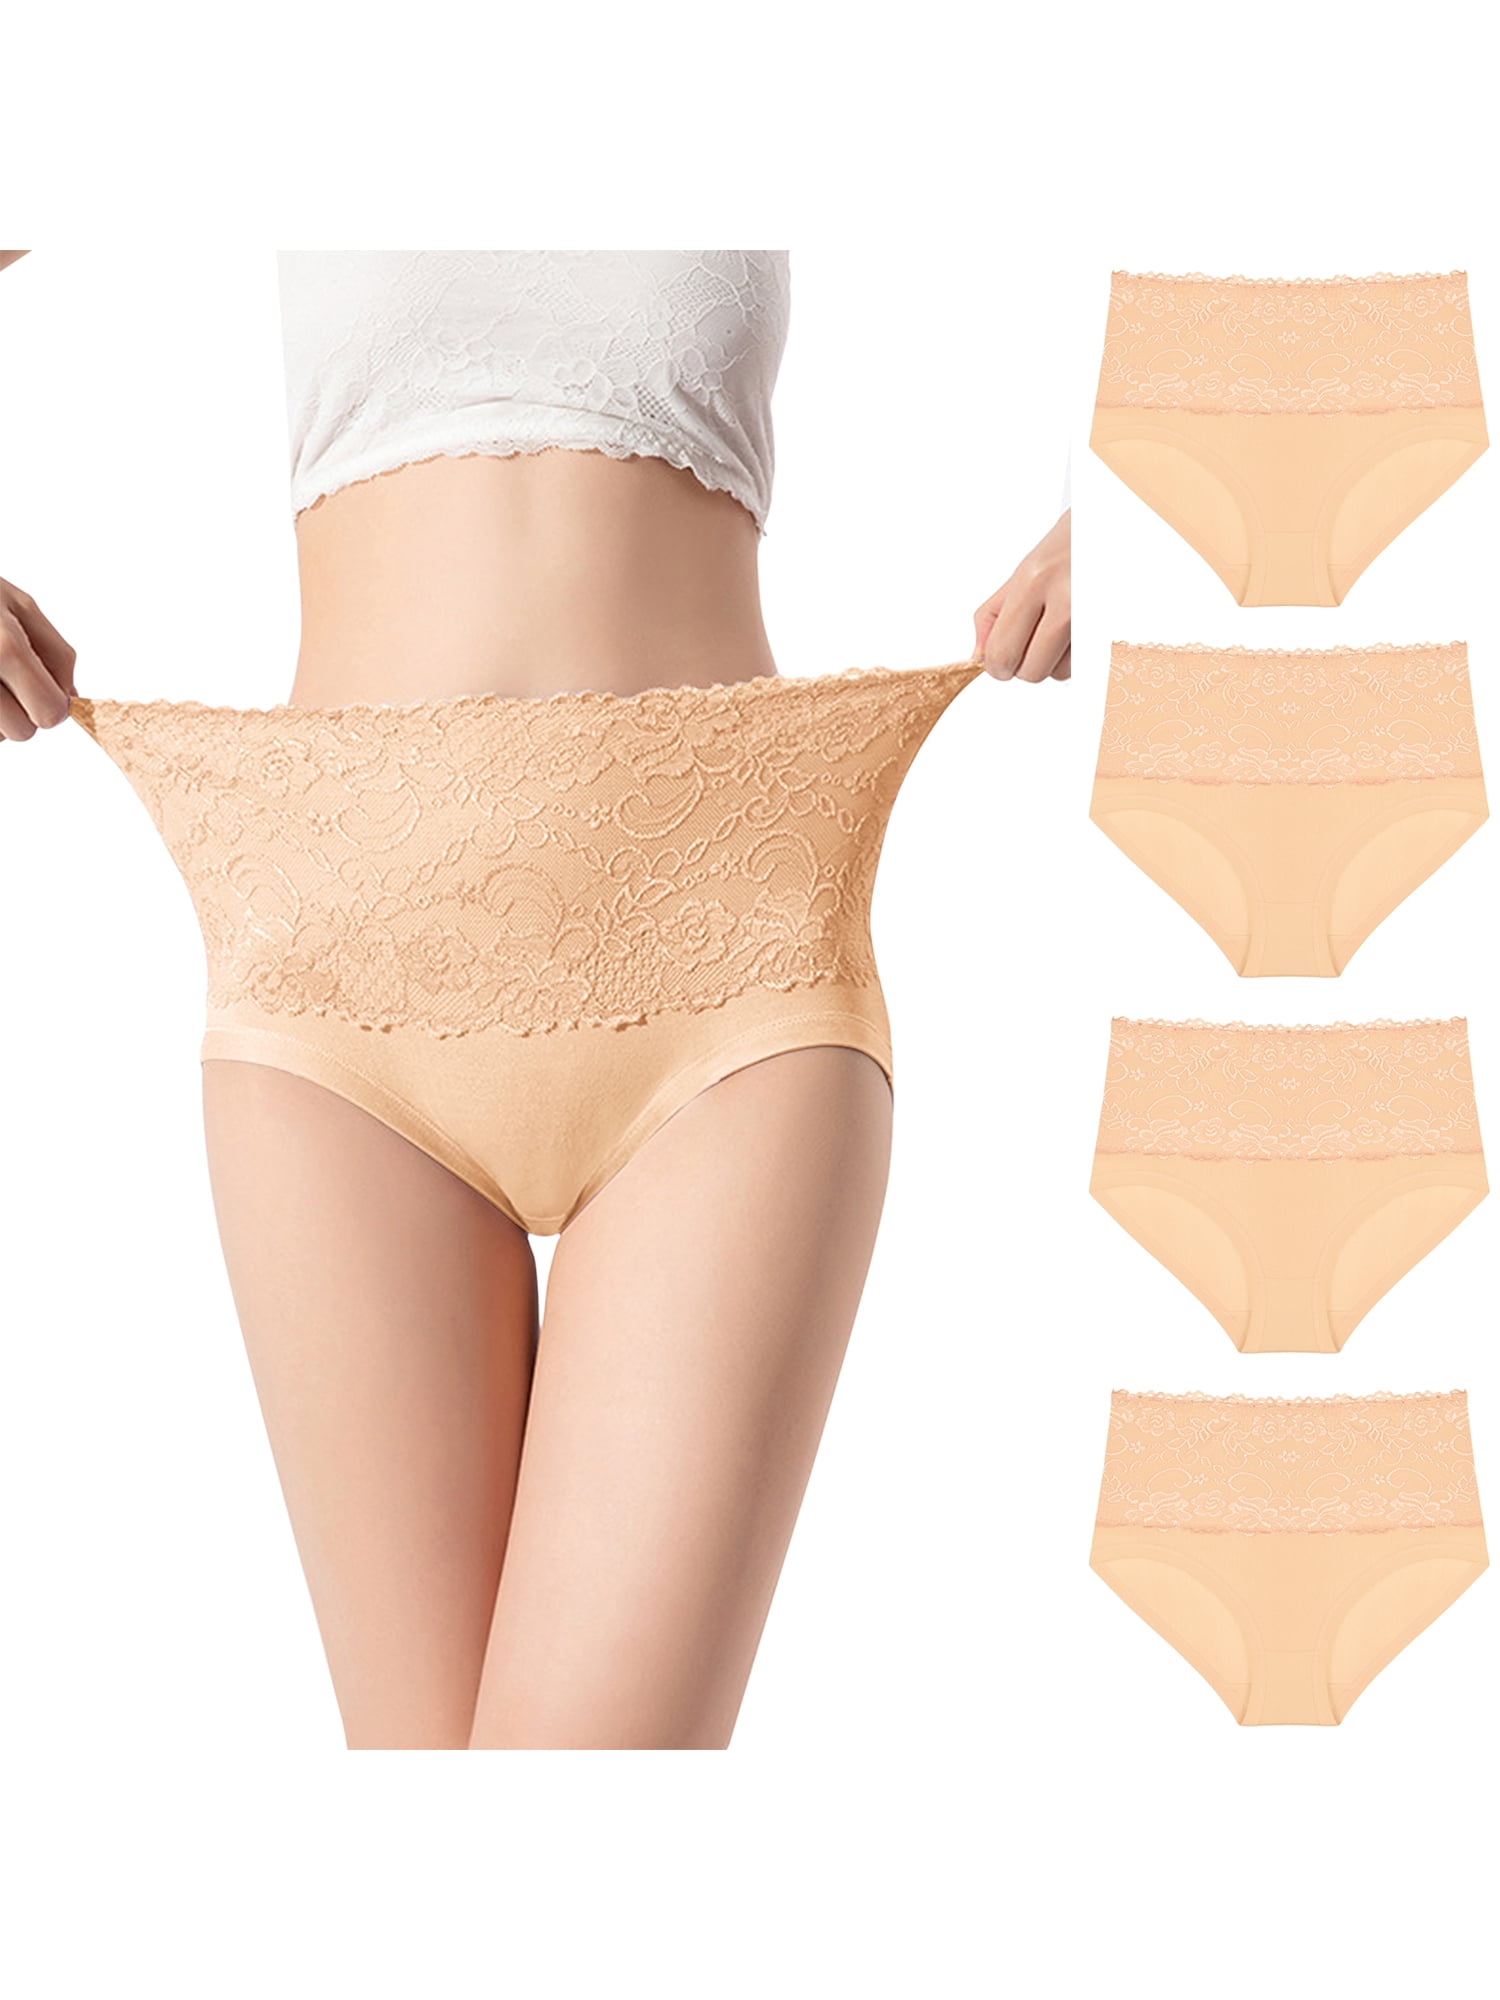 Comfortable High Waisted Lace Panties for Plus Size Women Seamless Underwear